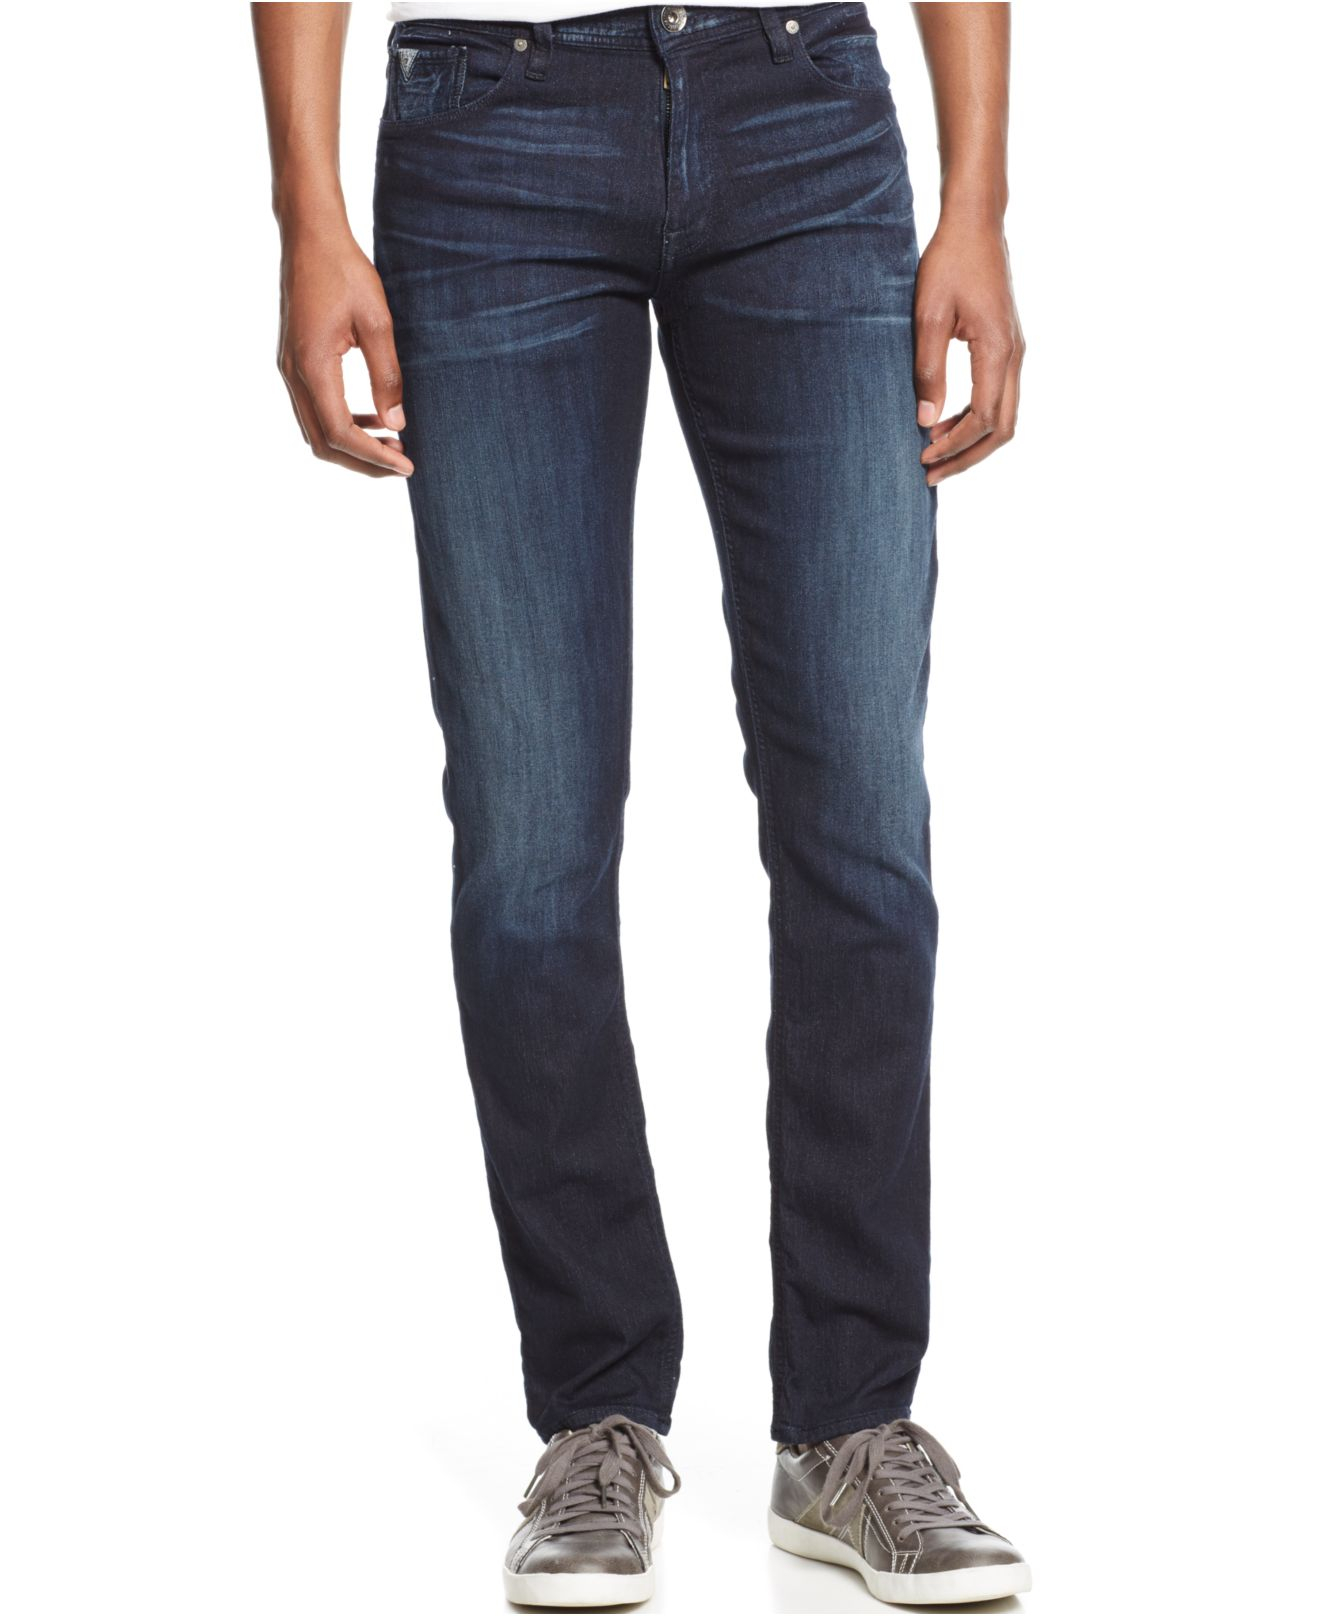 Lyst - Guess Slim Tapered Blue-wash Jeans in Blue for Men